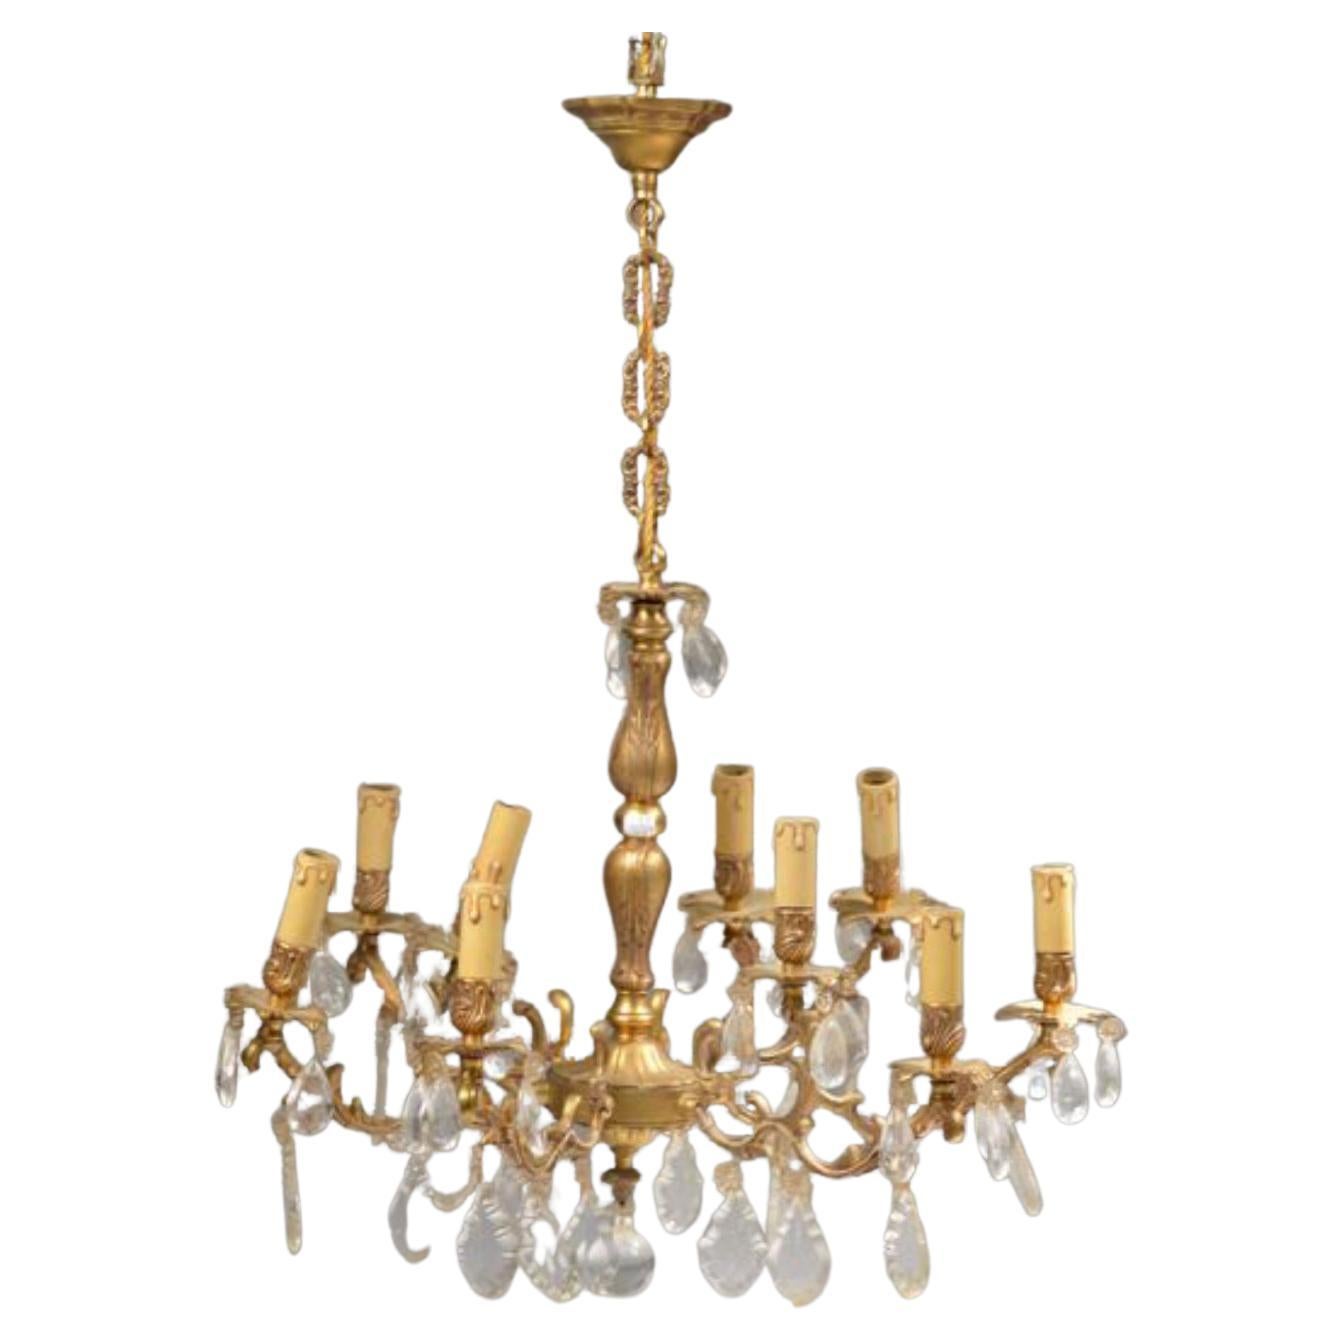 20th Century Bronze Chandelier with Crystal Decorations in Louis XV Style